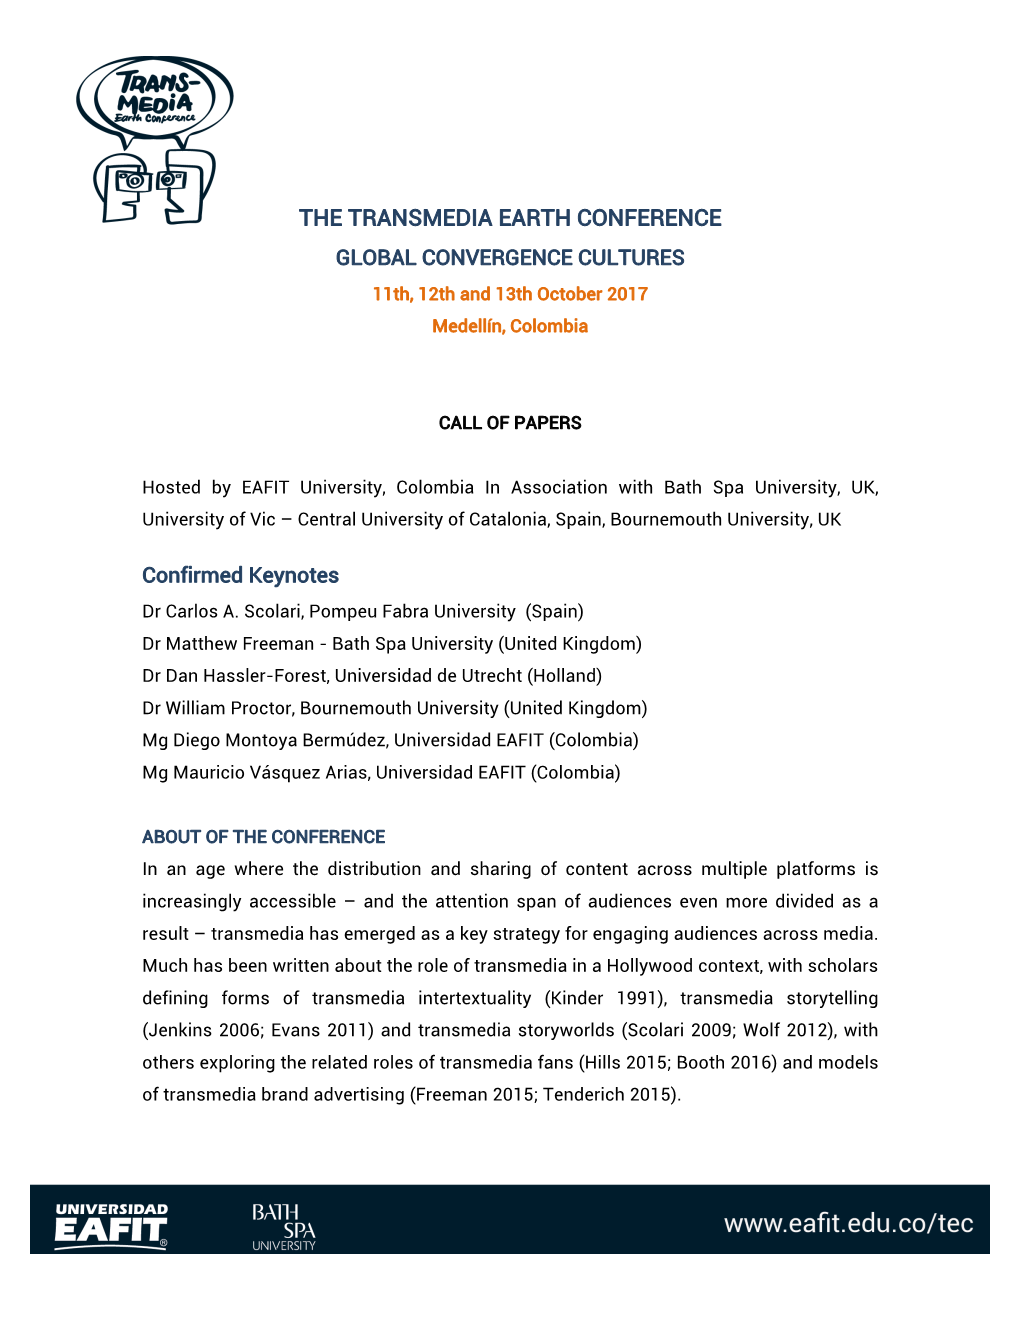 THE TRANSMEDIA EARTH CONFERENCE GLOBAL CONVERGENCE CULTURES 11Th, 12Th and 13Th October 2017 Medellín, Colombia